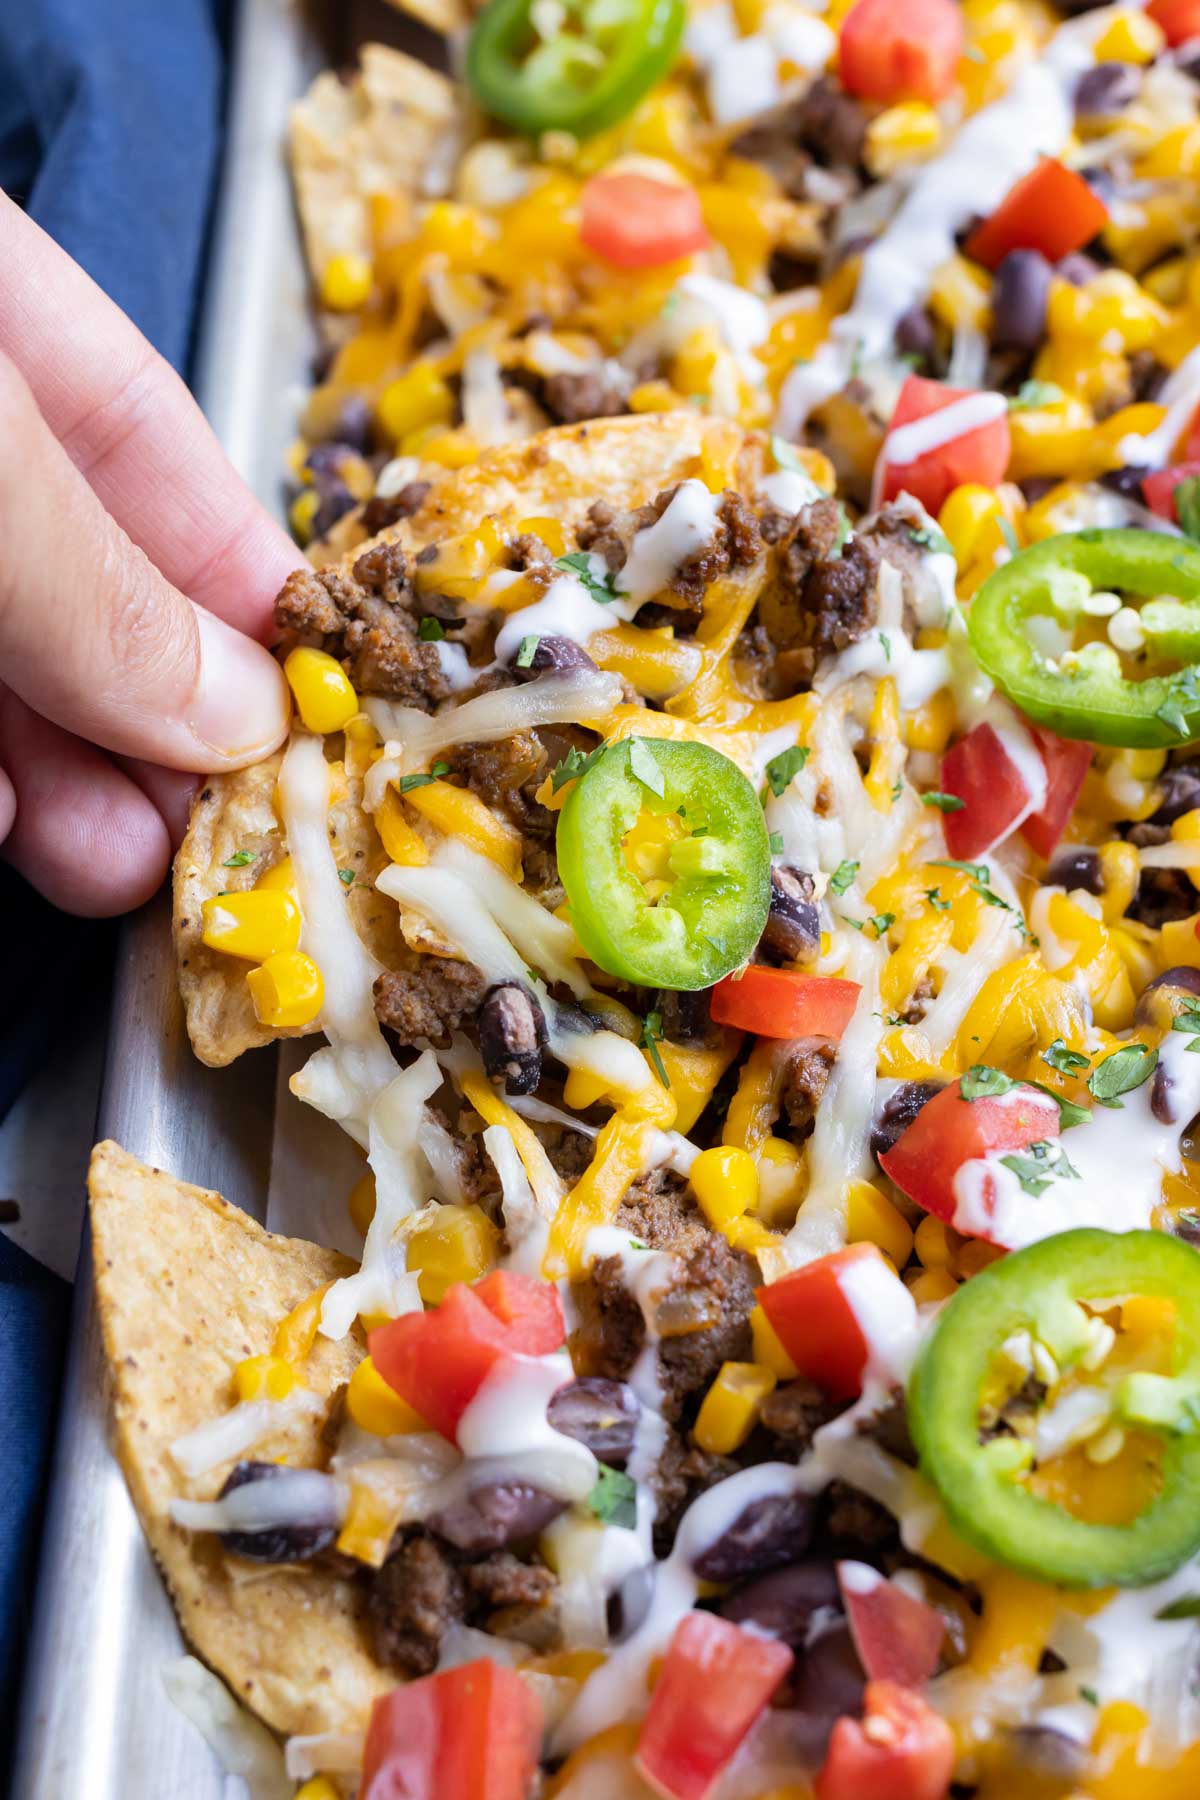 A hand picks up a serving of nachos from the sheet pan.